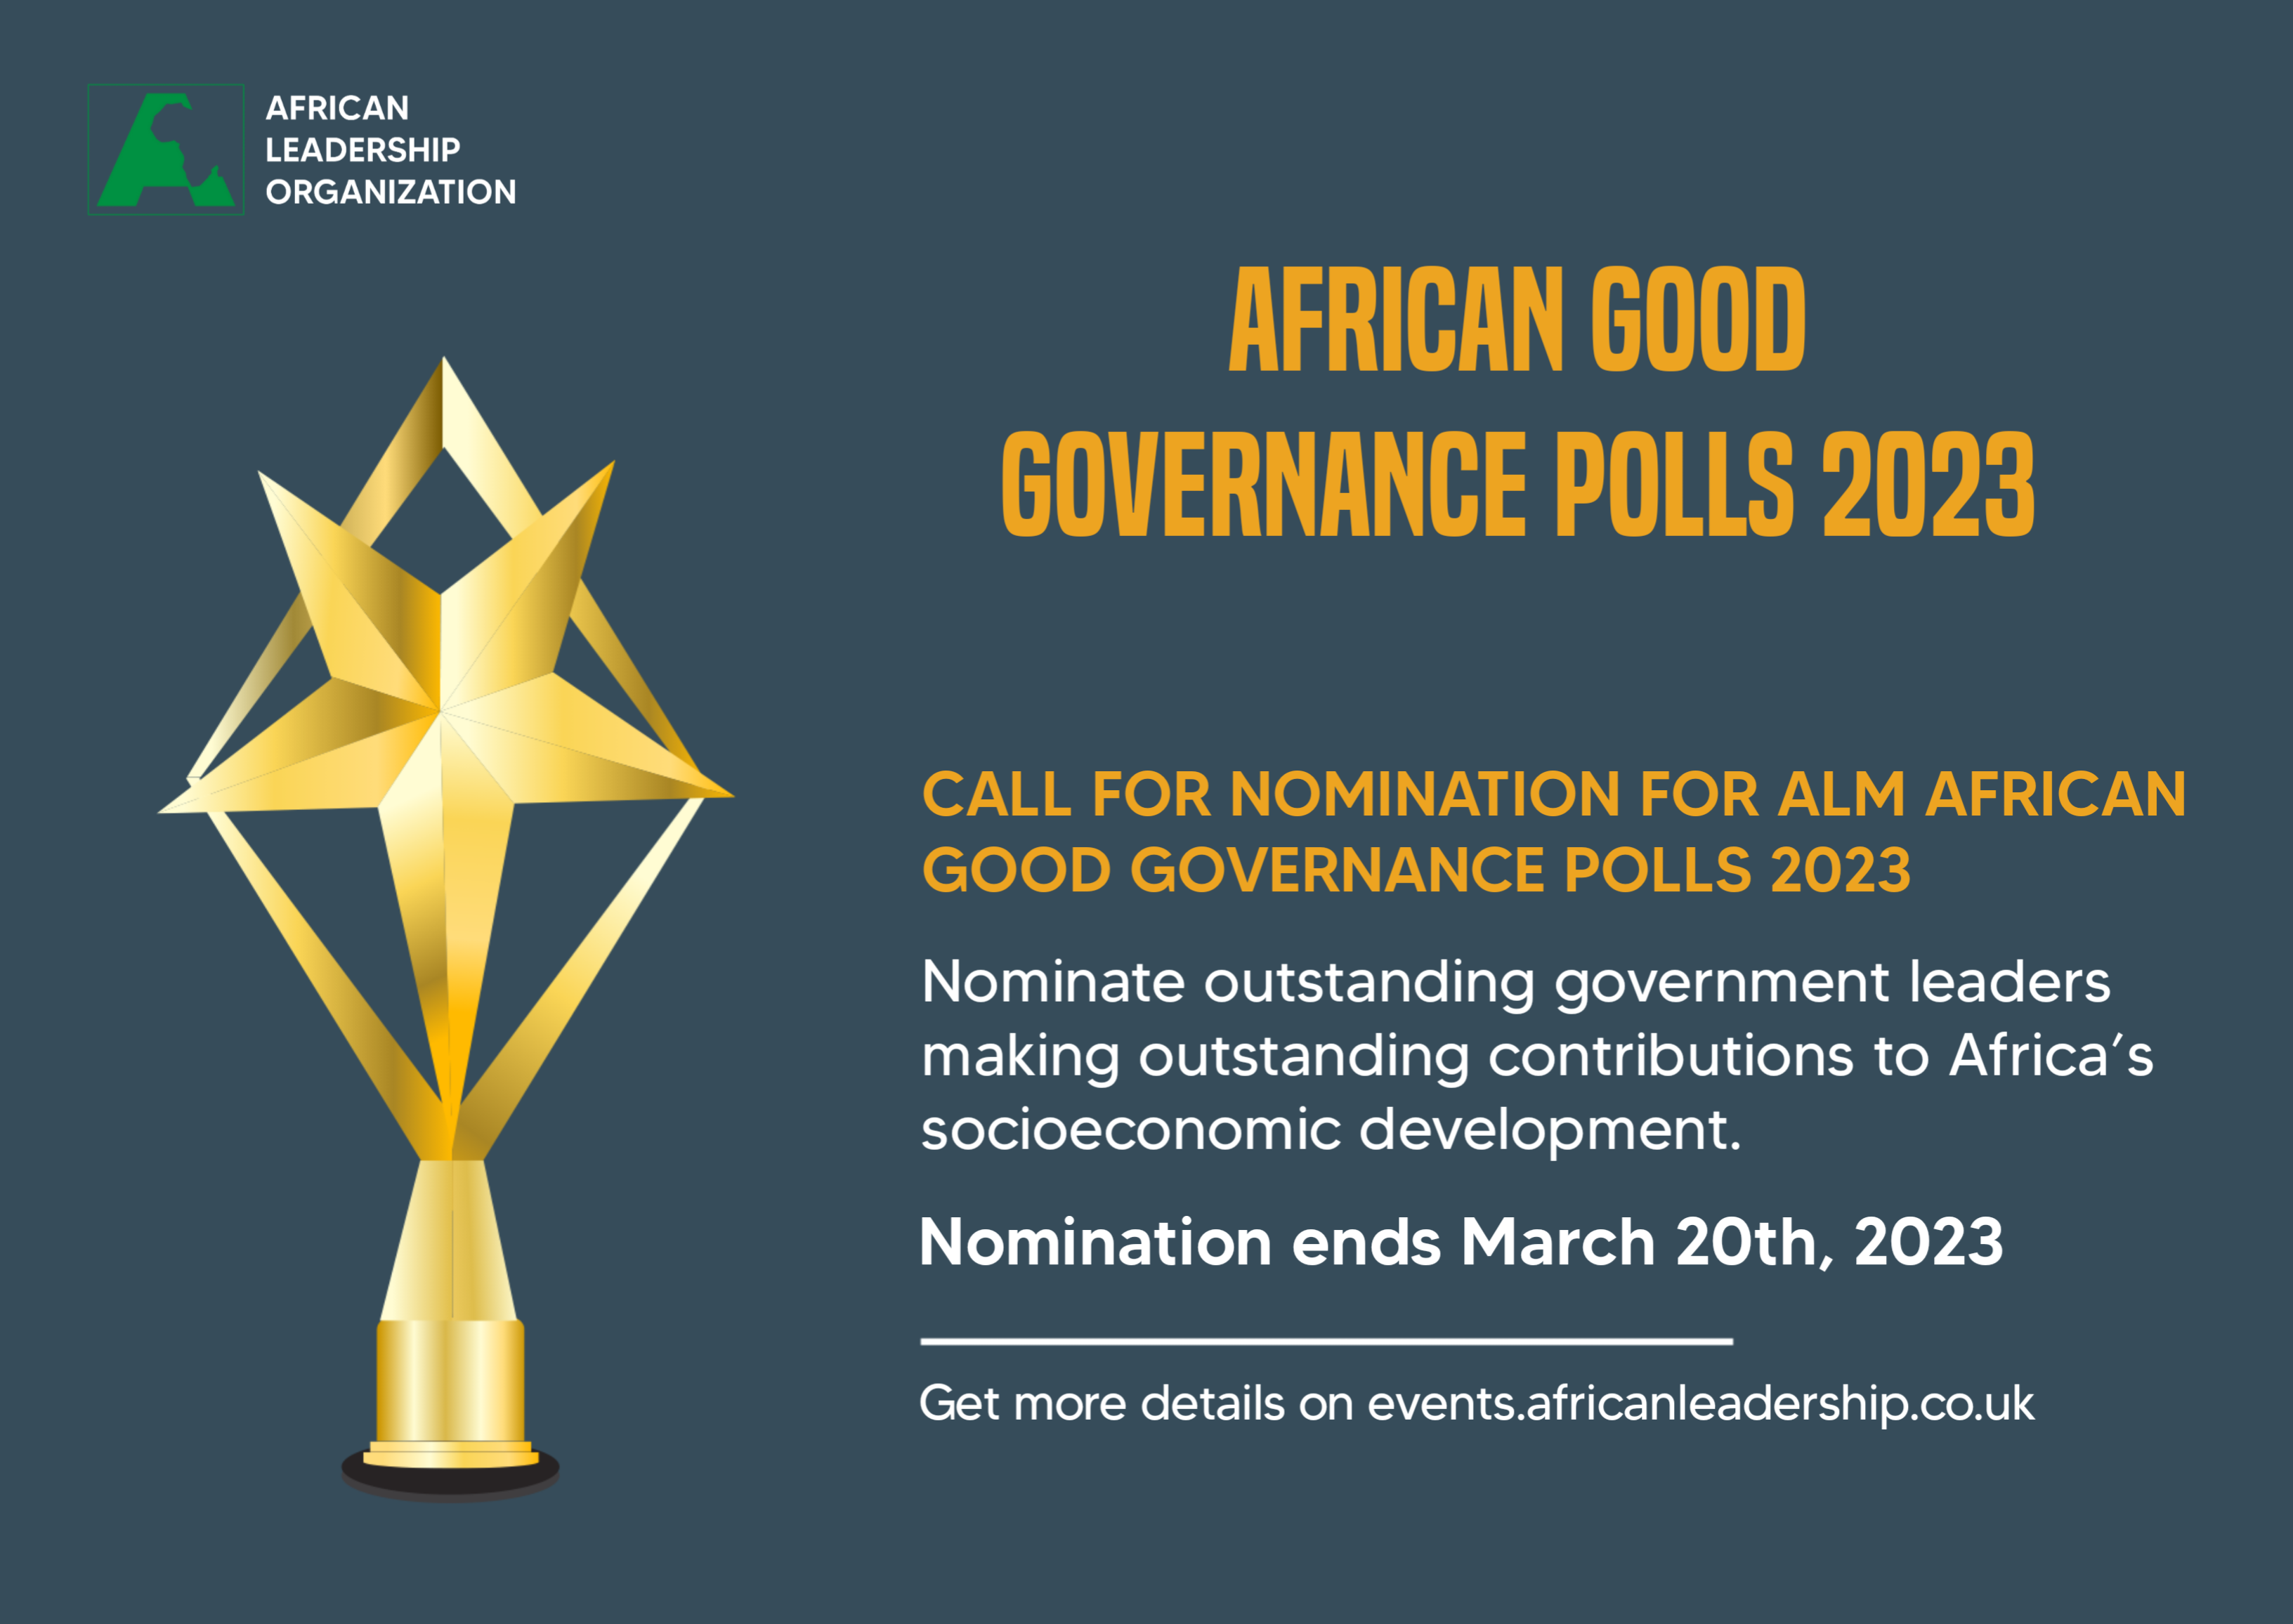 Call For Nomination For ALM African Good Governance Polls 2023